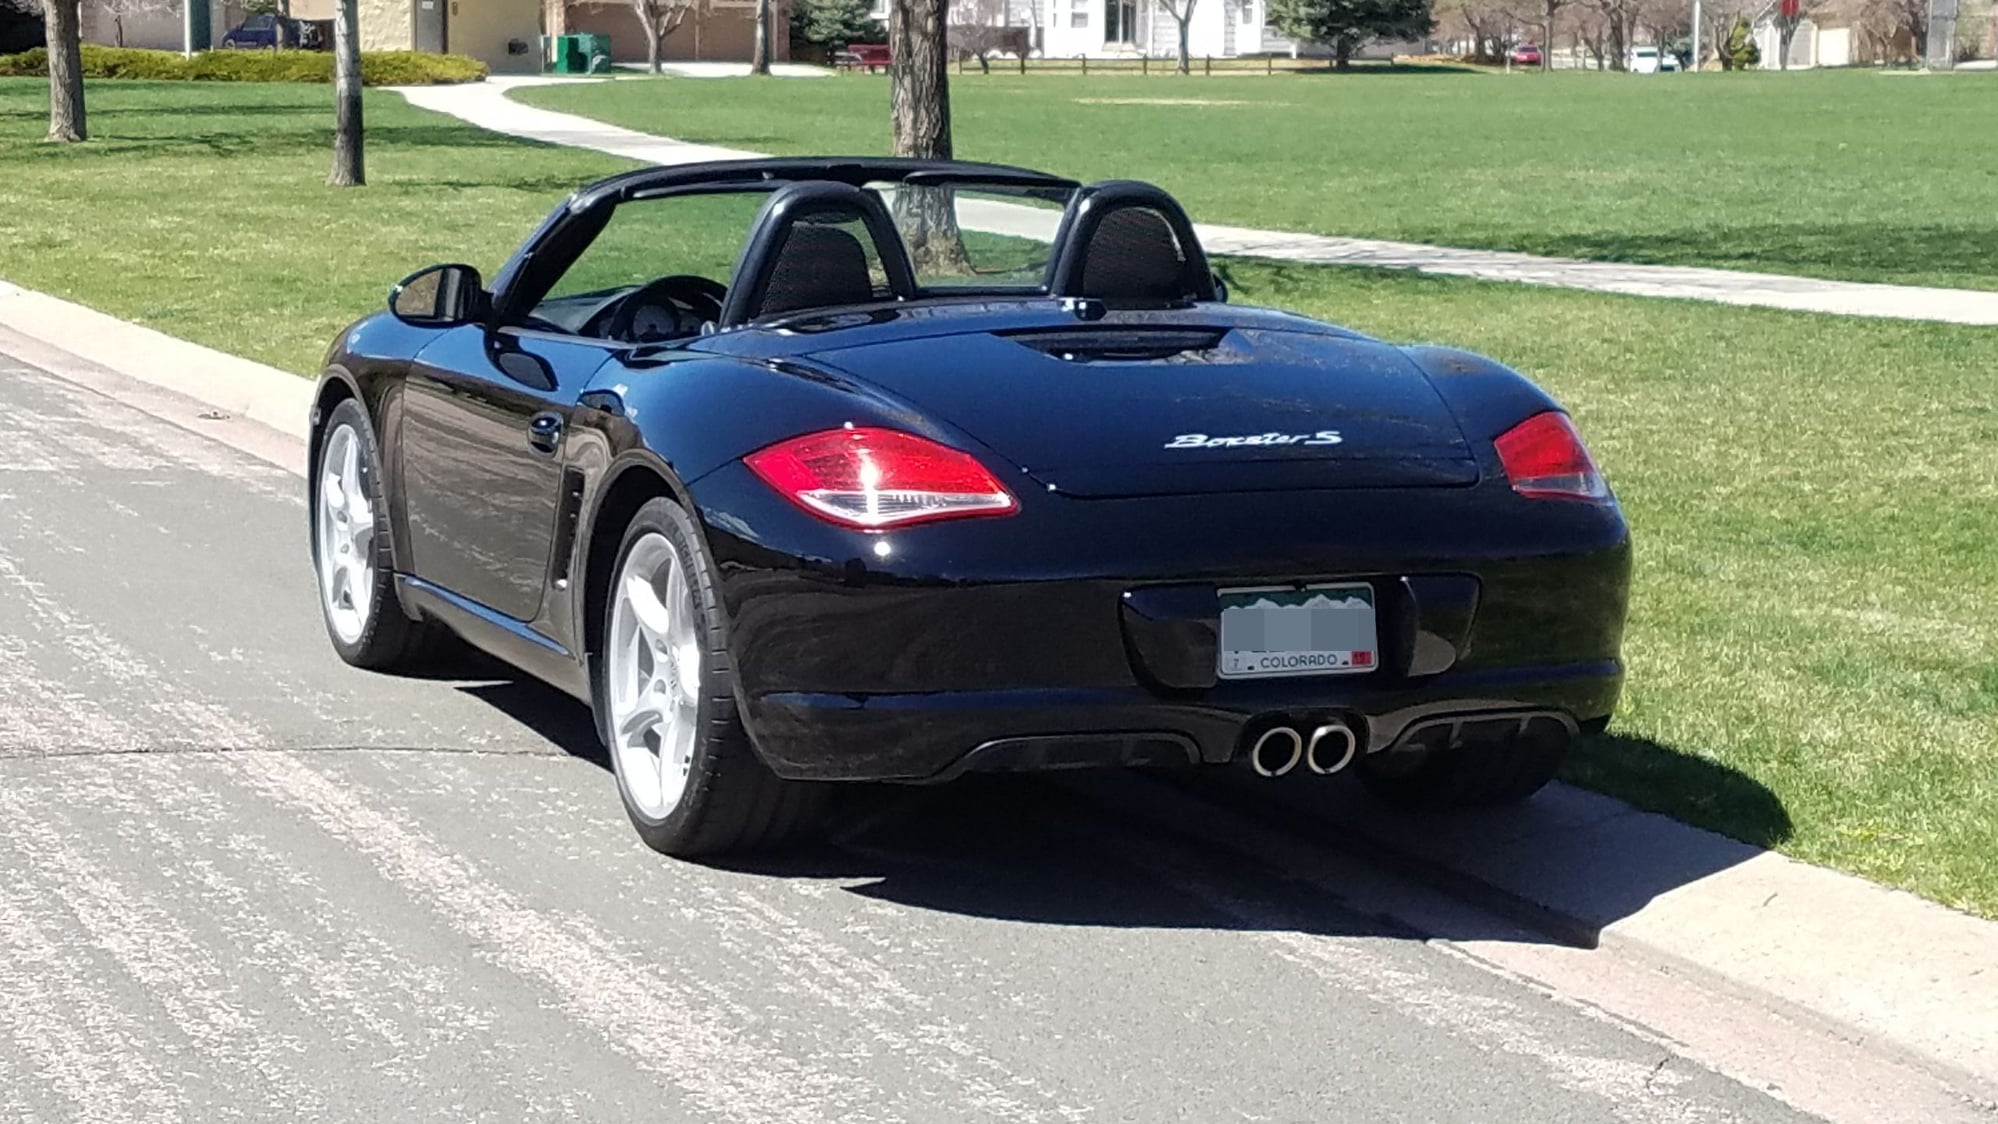 2011 Porsche Boxster - 2011 Boxster S - Used - VIN WP0CB2A86BS730137 - 60,250 Miles - 6 cyl - 2WD - Manual - Convertible - Black - Colorado Springs, CO 80919, United States